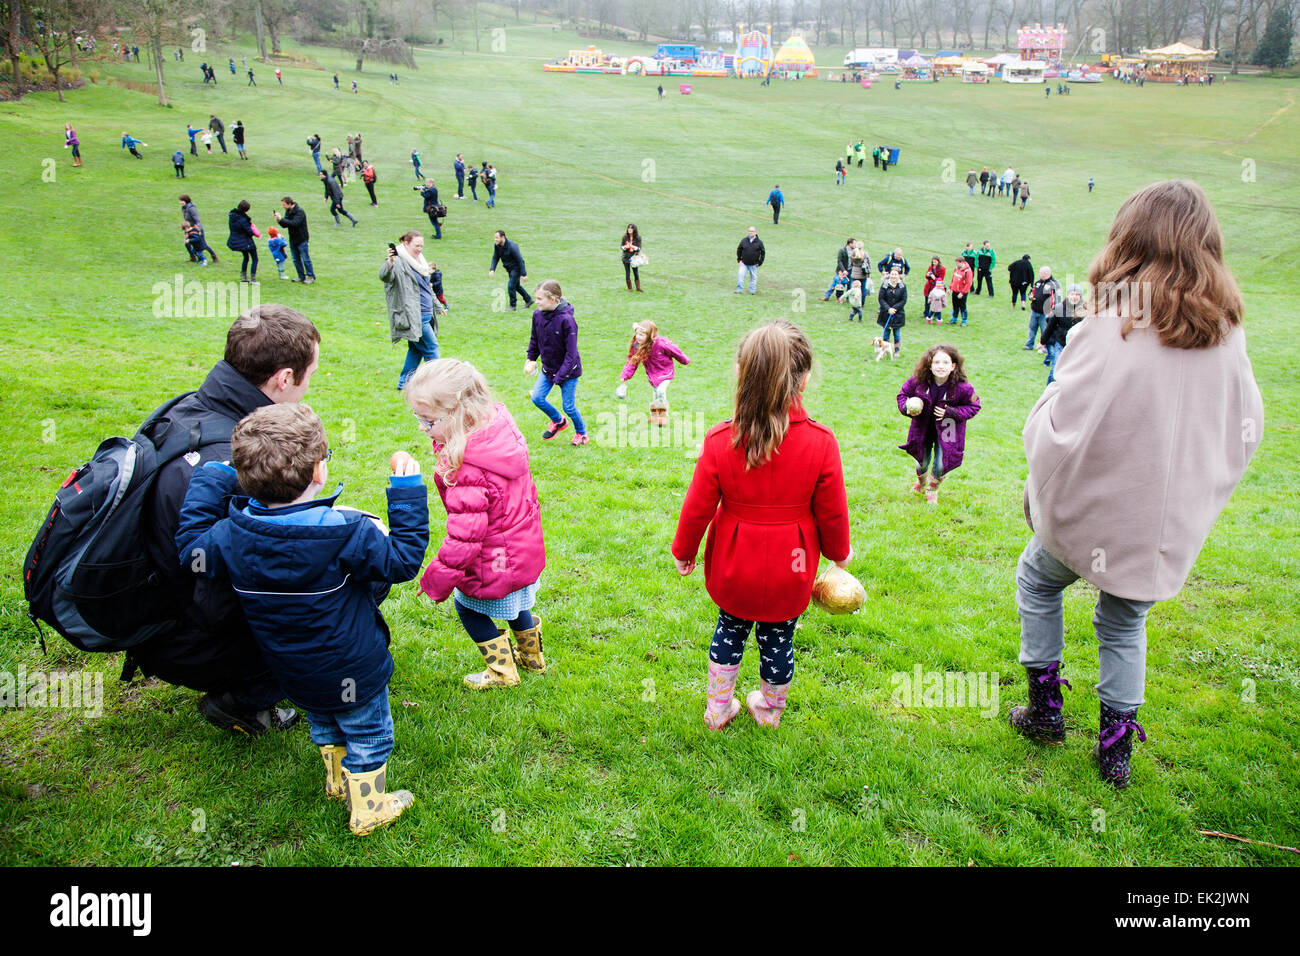 Avenham Park, Preston, Lancashire, UK 6th April, 2015. Easter Egg rolling at Avenham Park. Ria Heys, 4 years old from Leyland, rolling her Easter egg on the hill traditionally used for the event in the park, on the first rolling of the day. Stock Photo